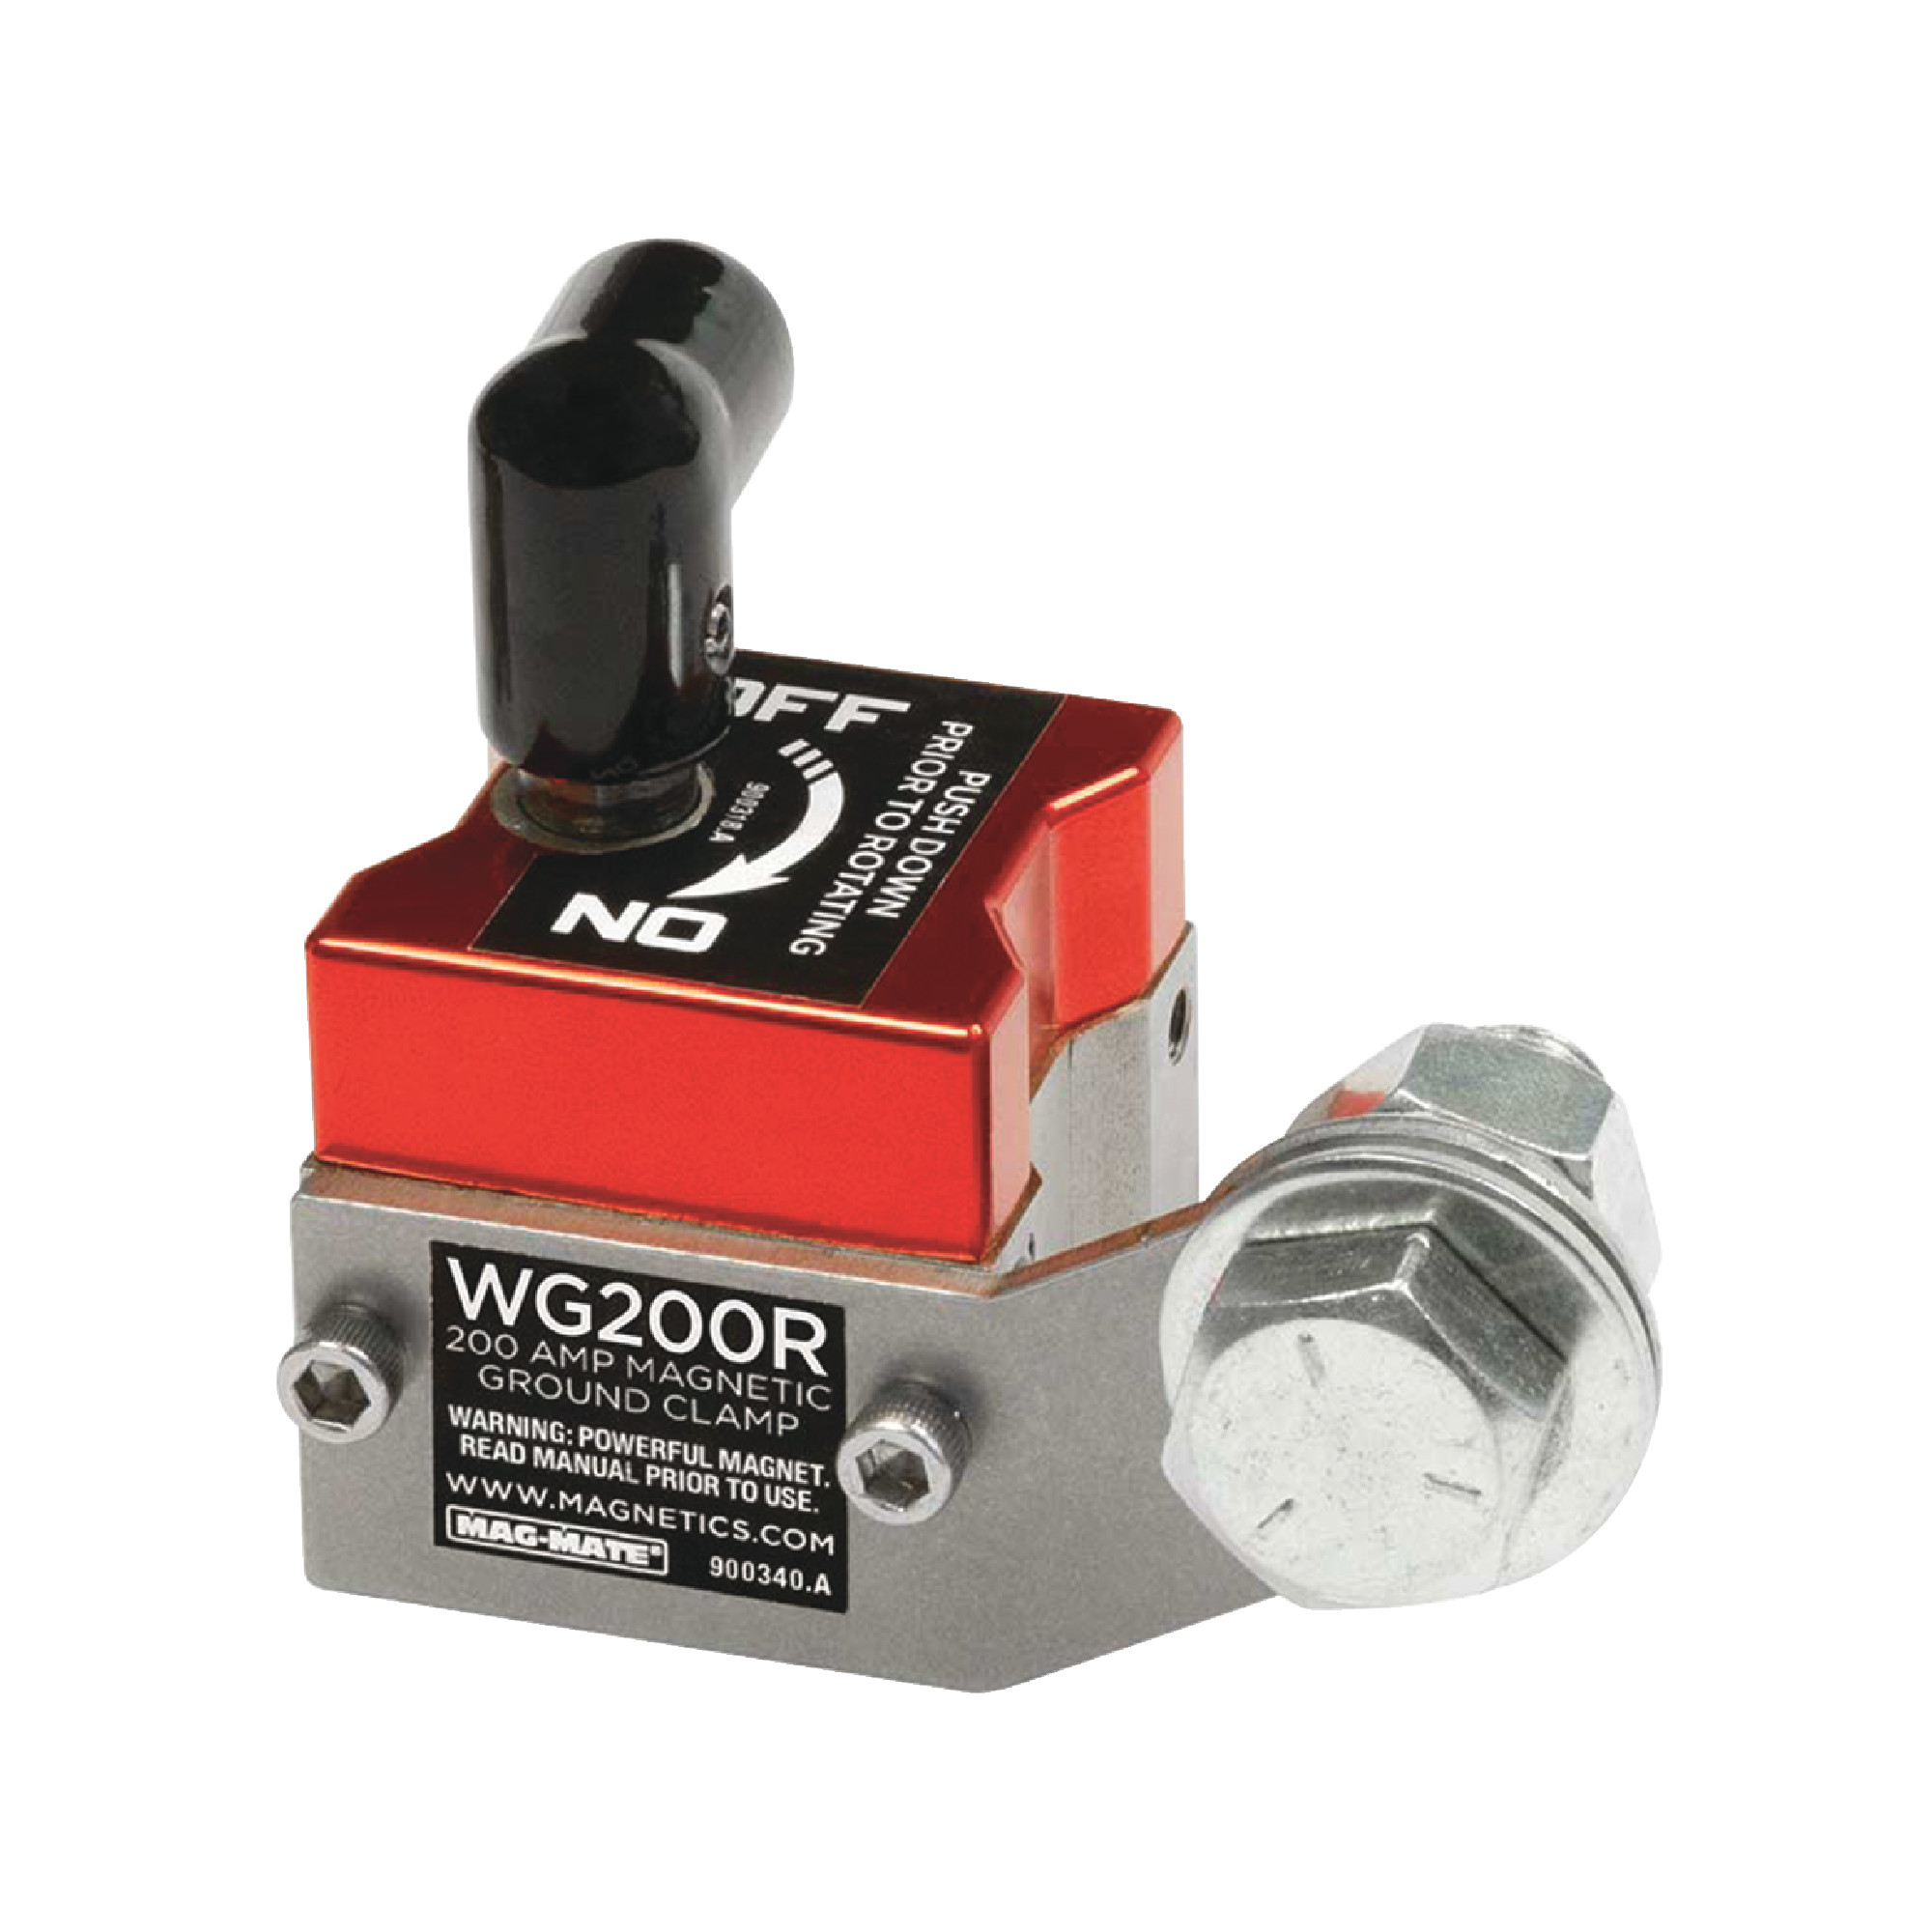 WG200R ON/OFF WELDING GROUNDS 1-13/16"W x 2-7/8"L x 2-3/4"H  200 AMPS